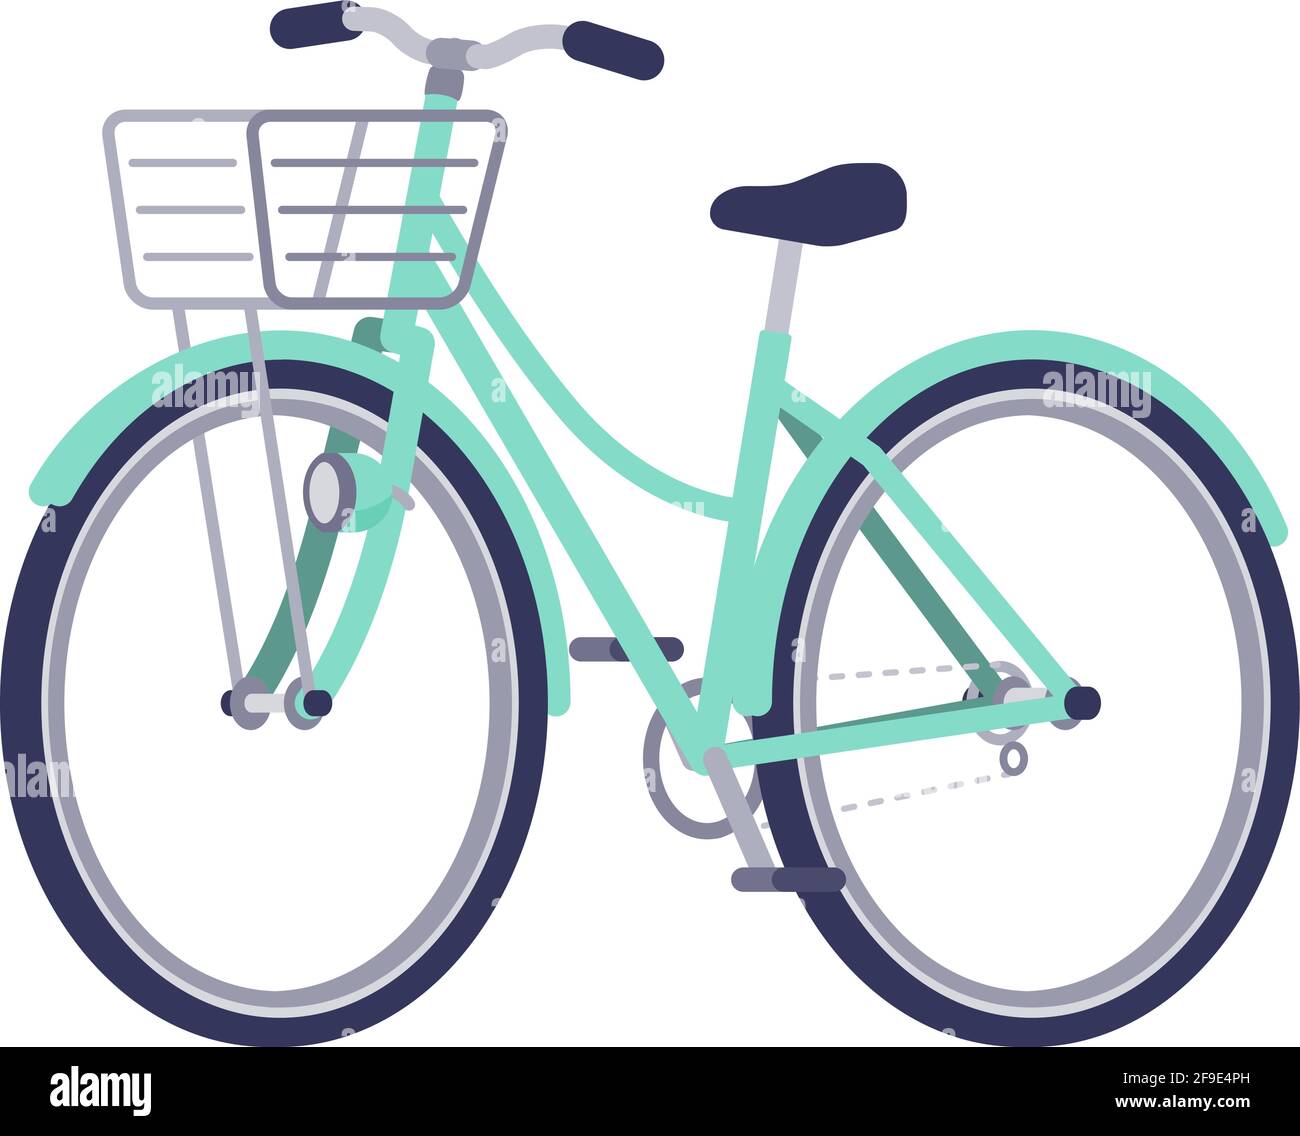 Diagonal angle bicycle. Mamachari. Vector illustration that is easy to edit. Stock Vector